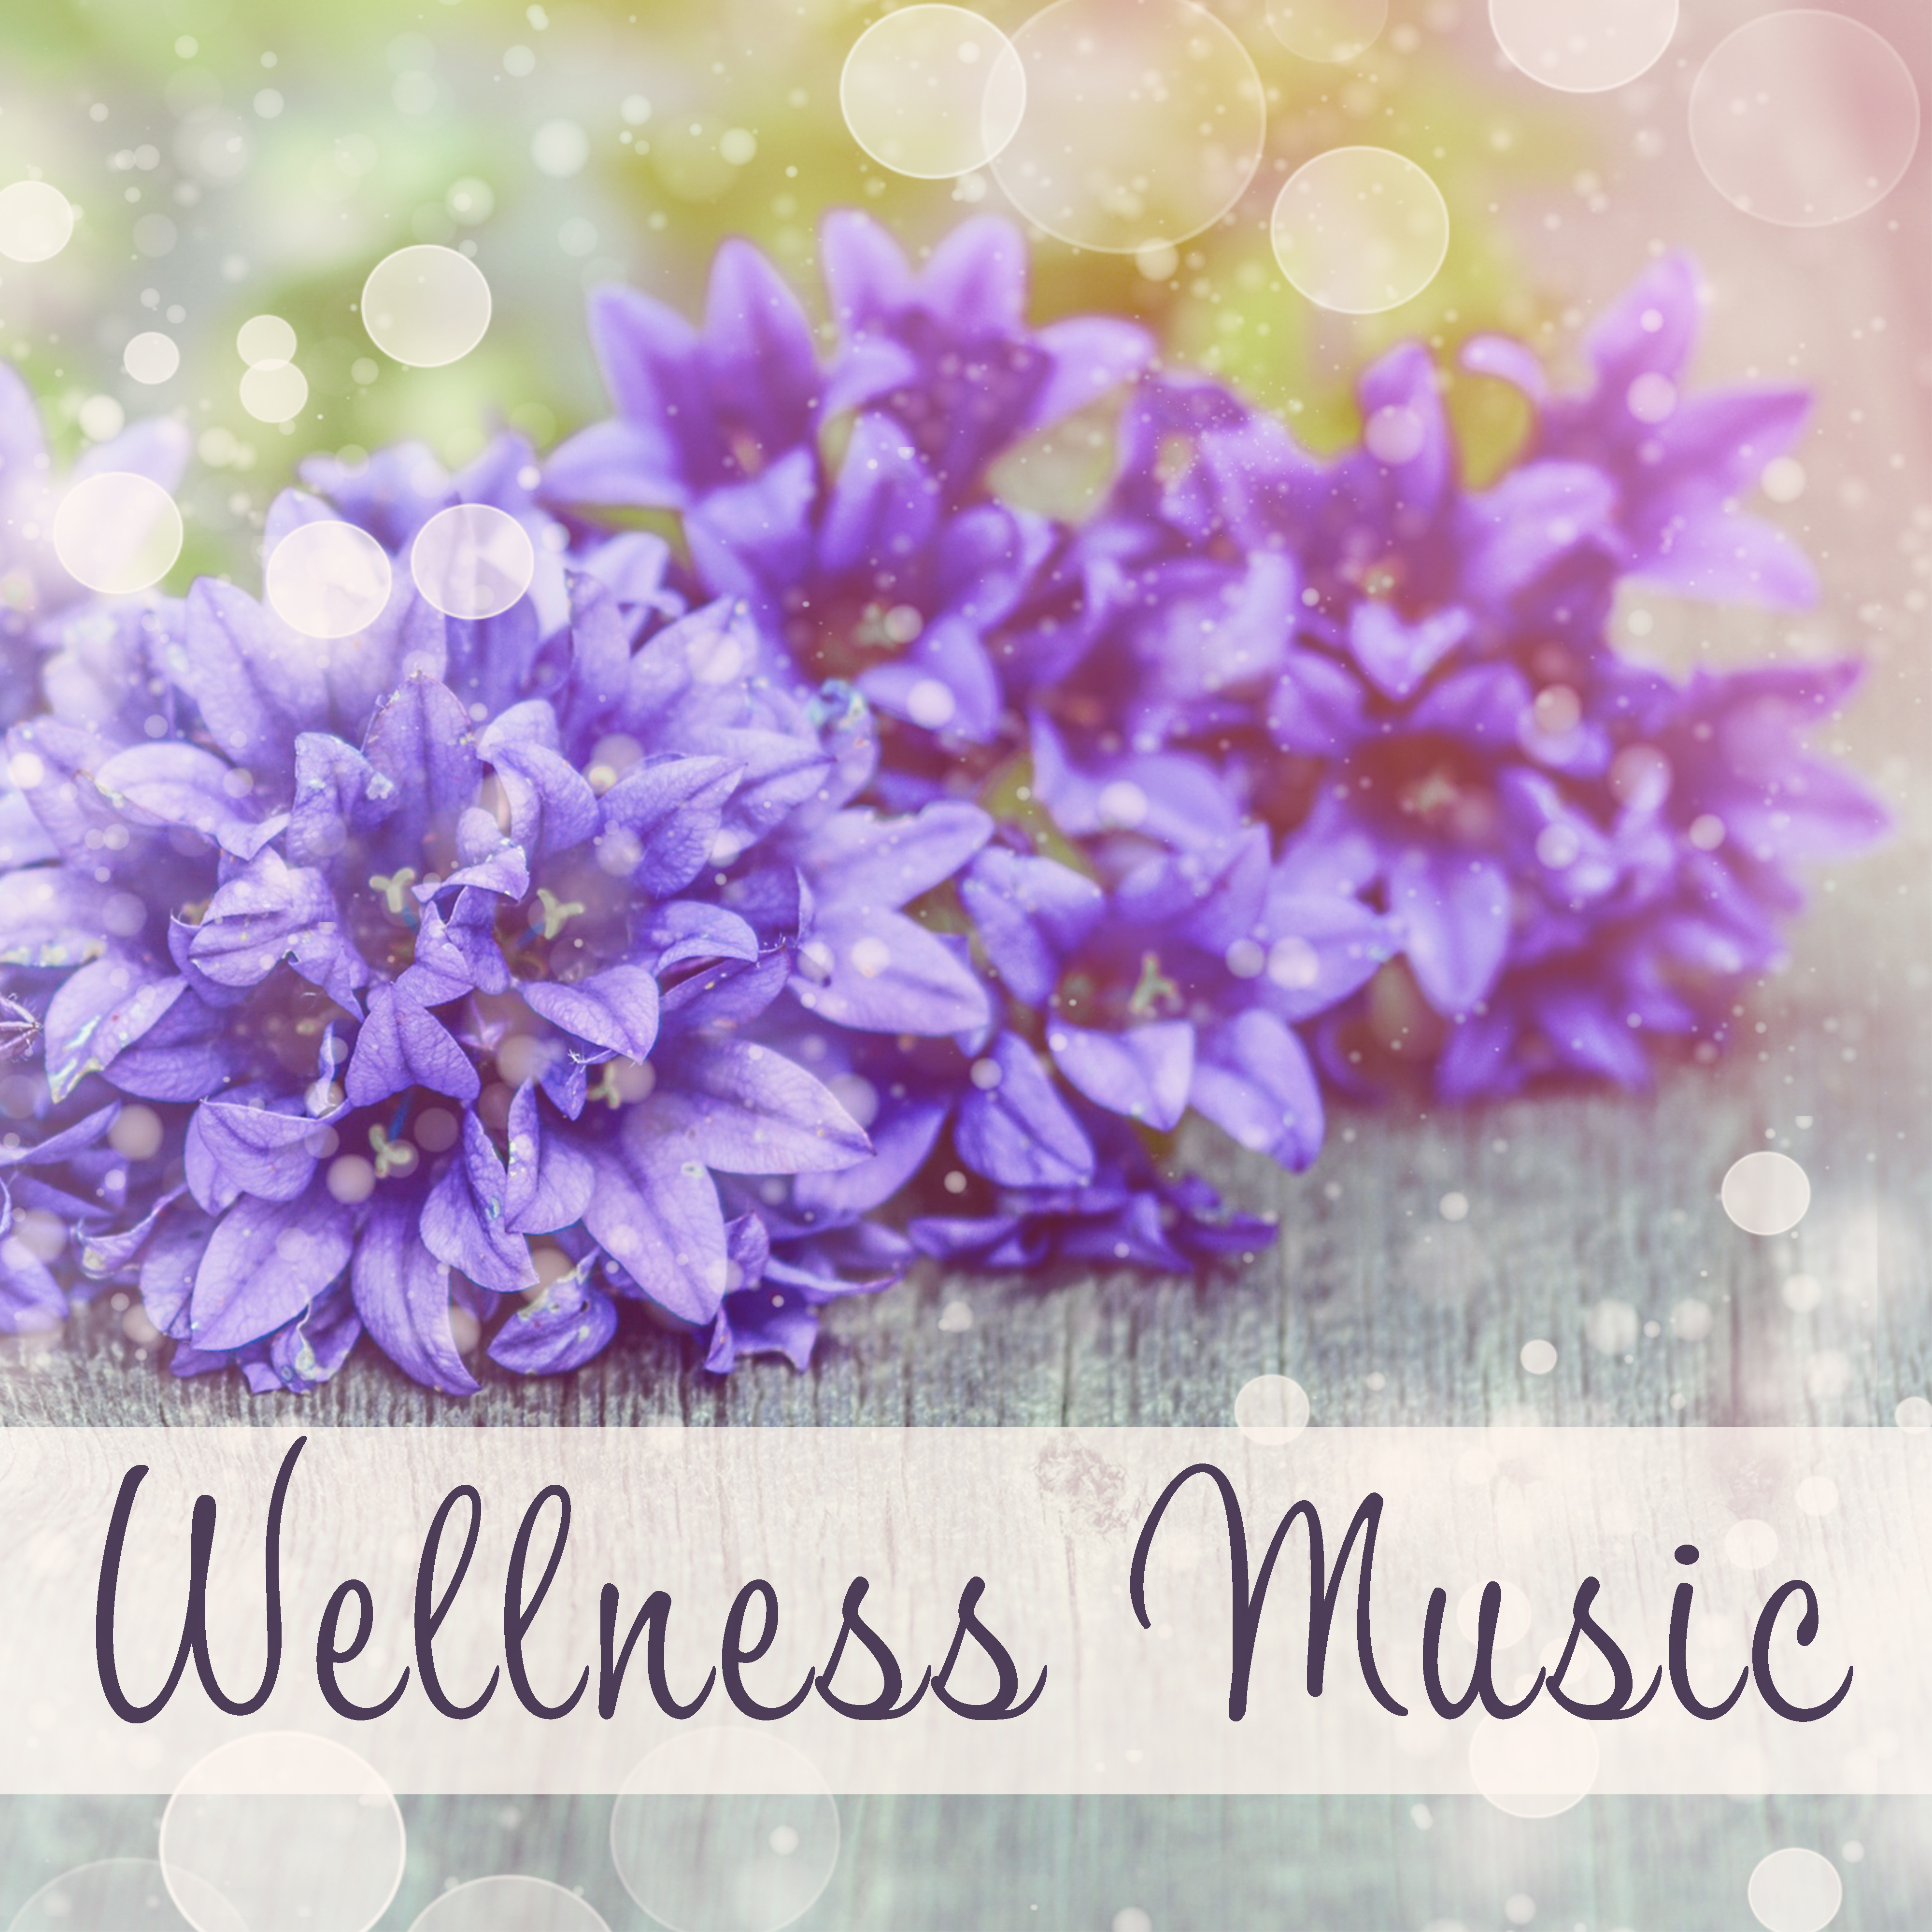 Wellness Music – Delicate Melodies for Spa, Sleep, Massage, Zen Spa, Sounds of Sea, Relaxing Songs